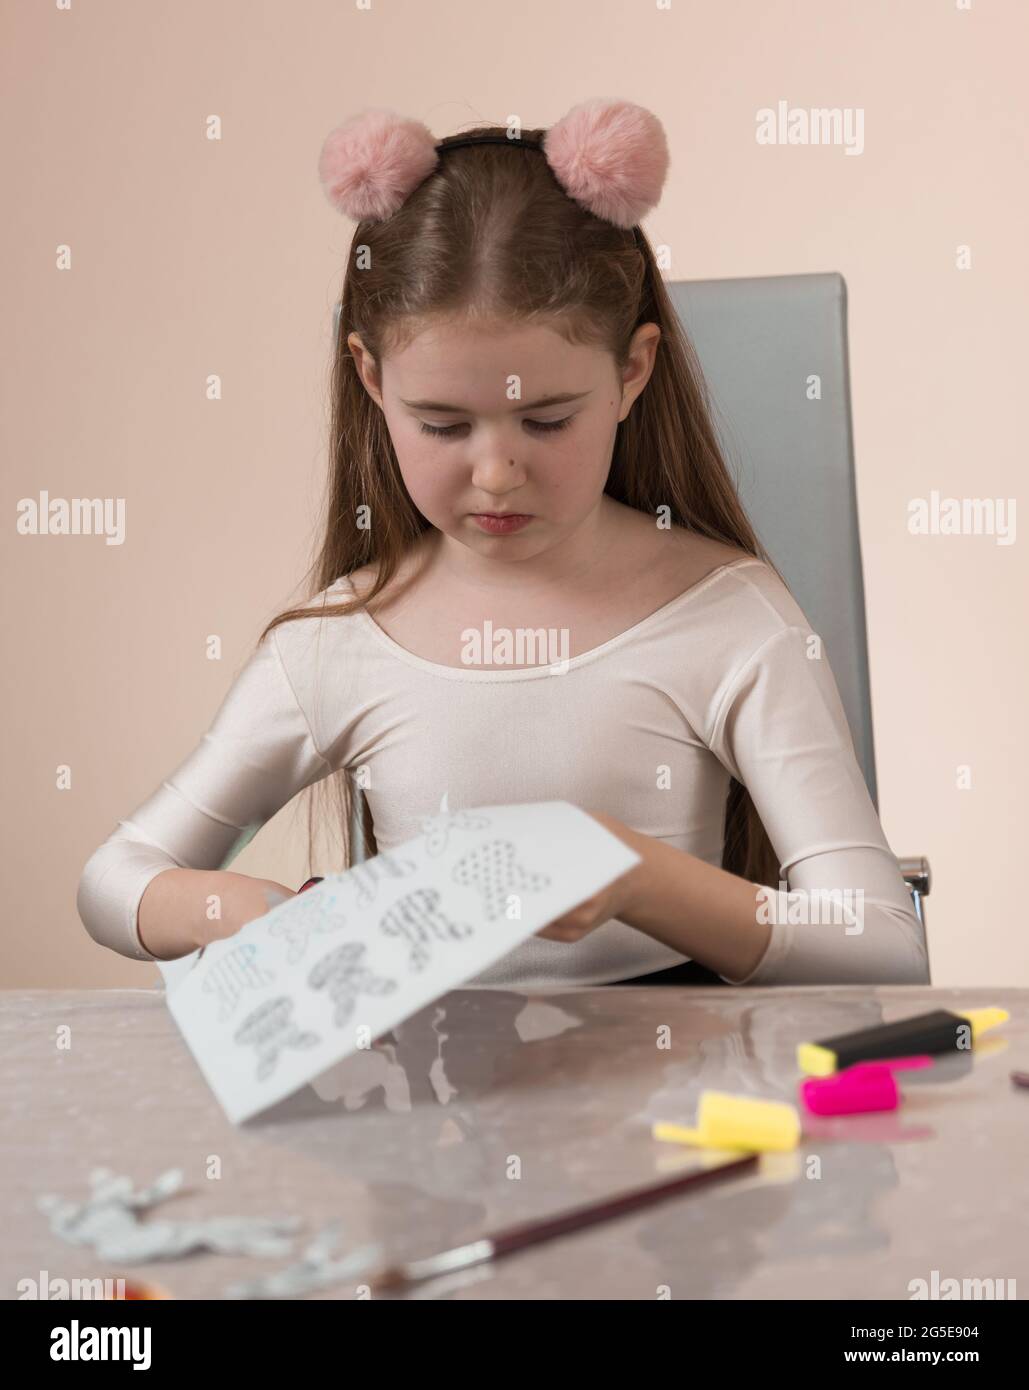 A school-age girl is sitting at a table and is concentrating on cutting jewelry and gifts out of paper with stationery scissors. Long hair and a headb Stock Photo